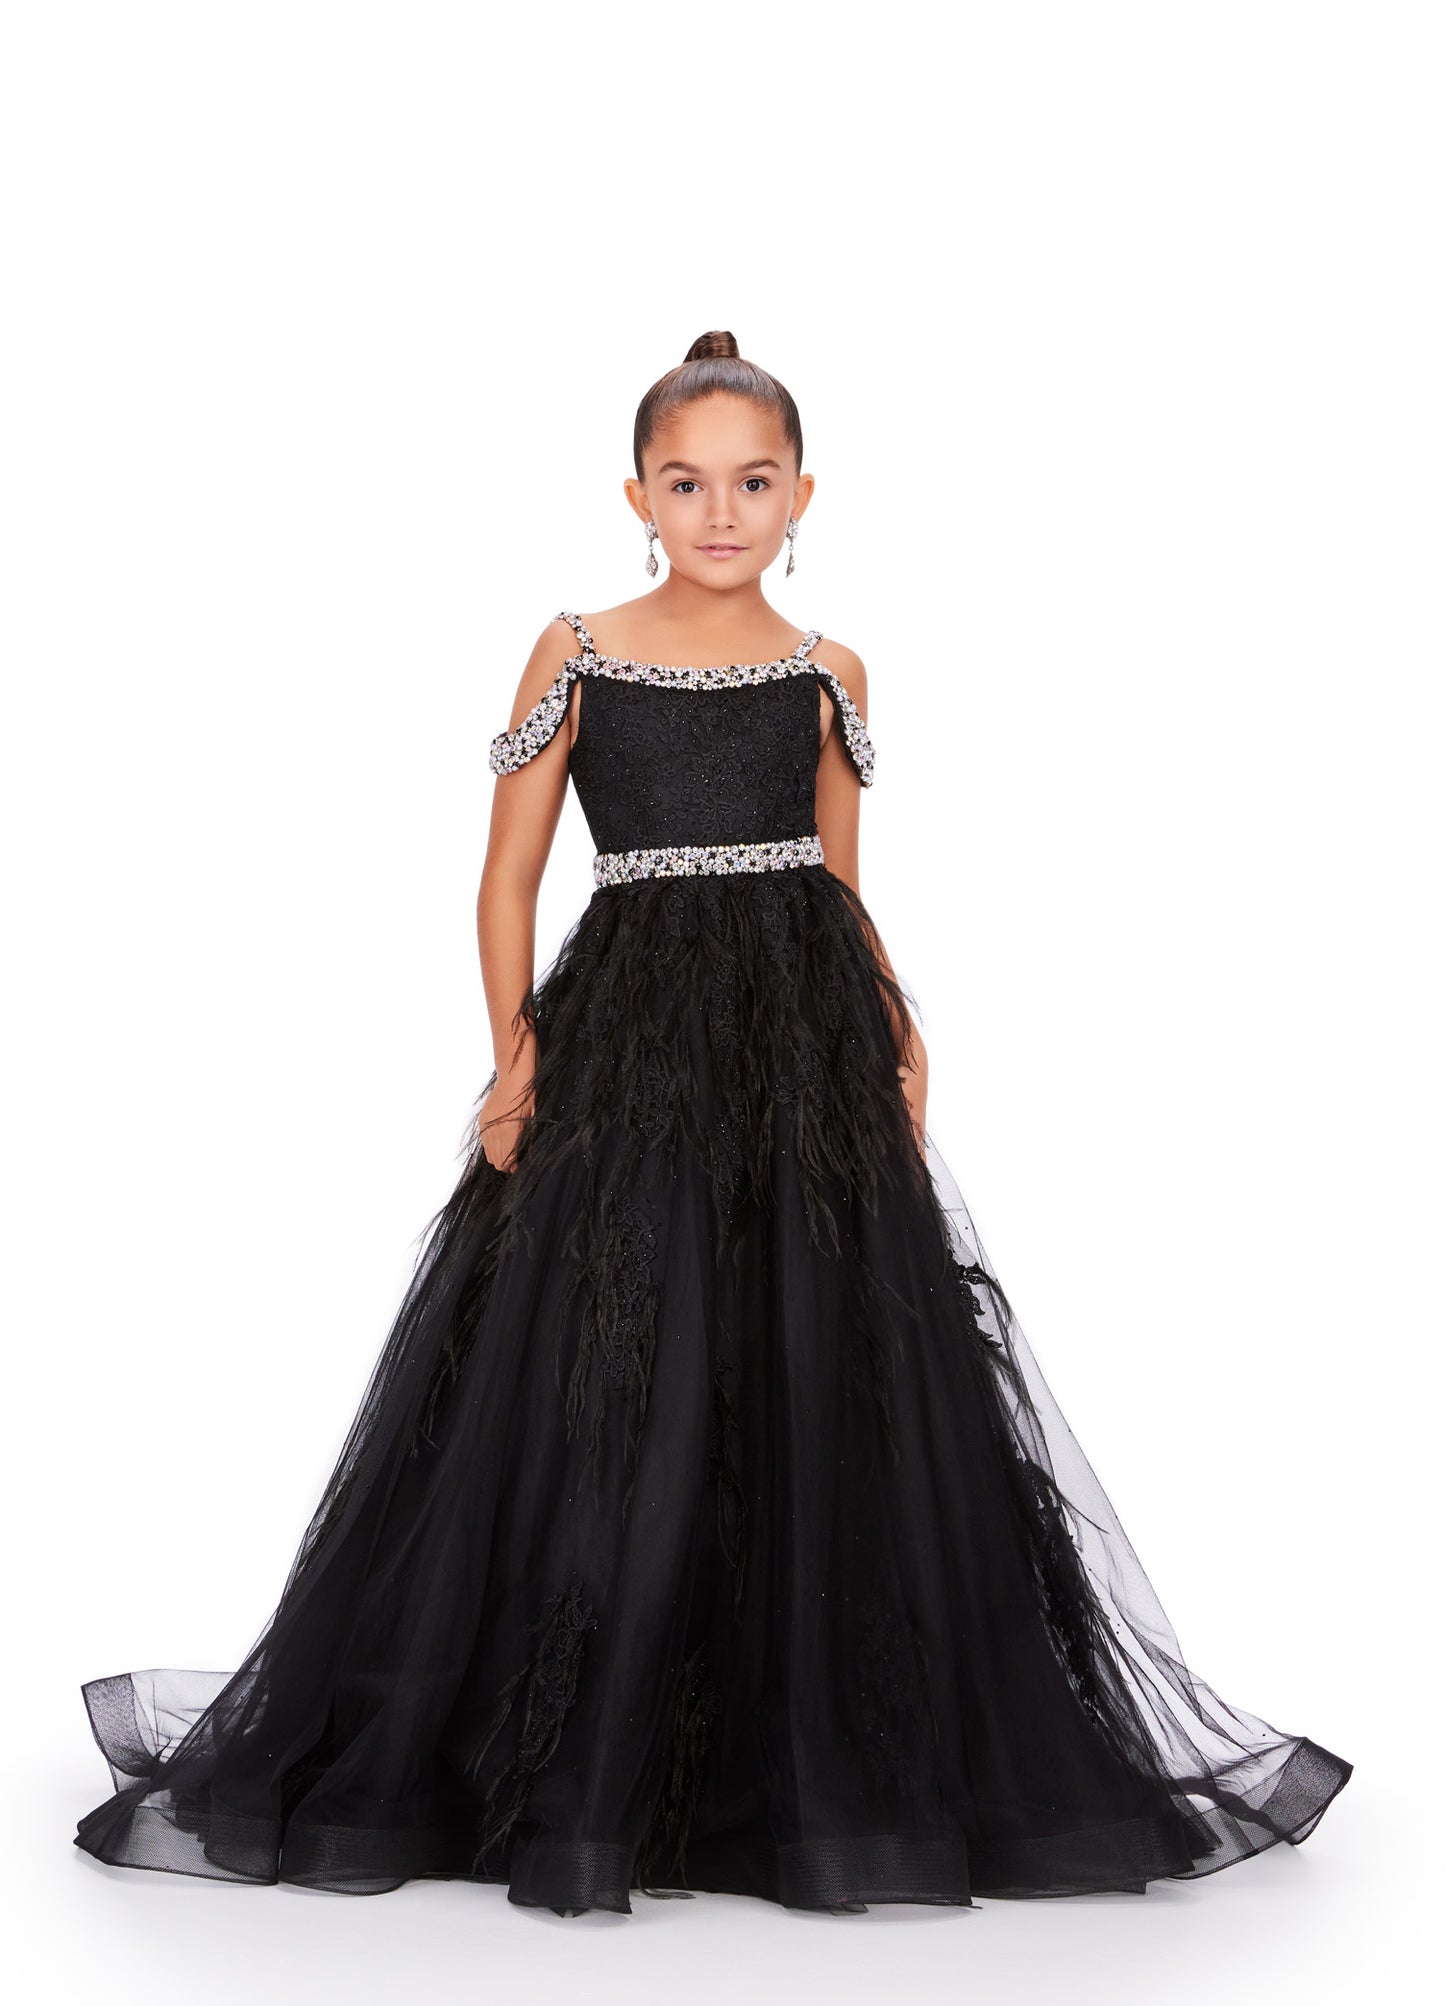 Experience the epitome of elegance and grace with the Ashley Lauren Kids 8242 Girls Lace Feather Pageant Dress. Featuring delicate lace and stunning feather accents, this off the shoulder ballgown is the perfect choice for any special occasion. Its impeccable design and craftsmanship will make your little girl feel like a true princess. This gorgeous kids gown is embellished with crystal beaded straps, neckline trim and belt. The dress is adorned with lace applique, press on stones and feather accents.